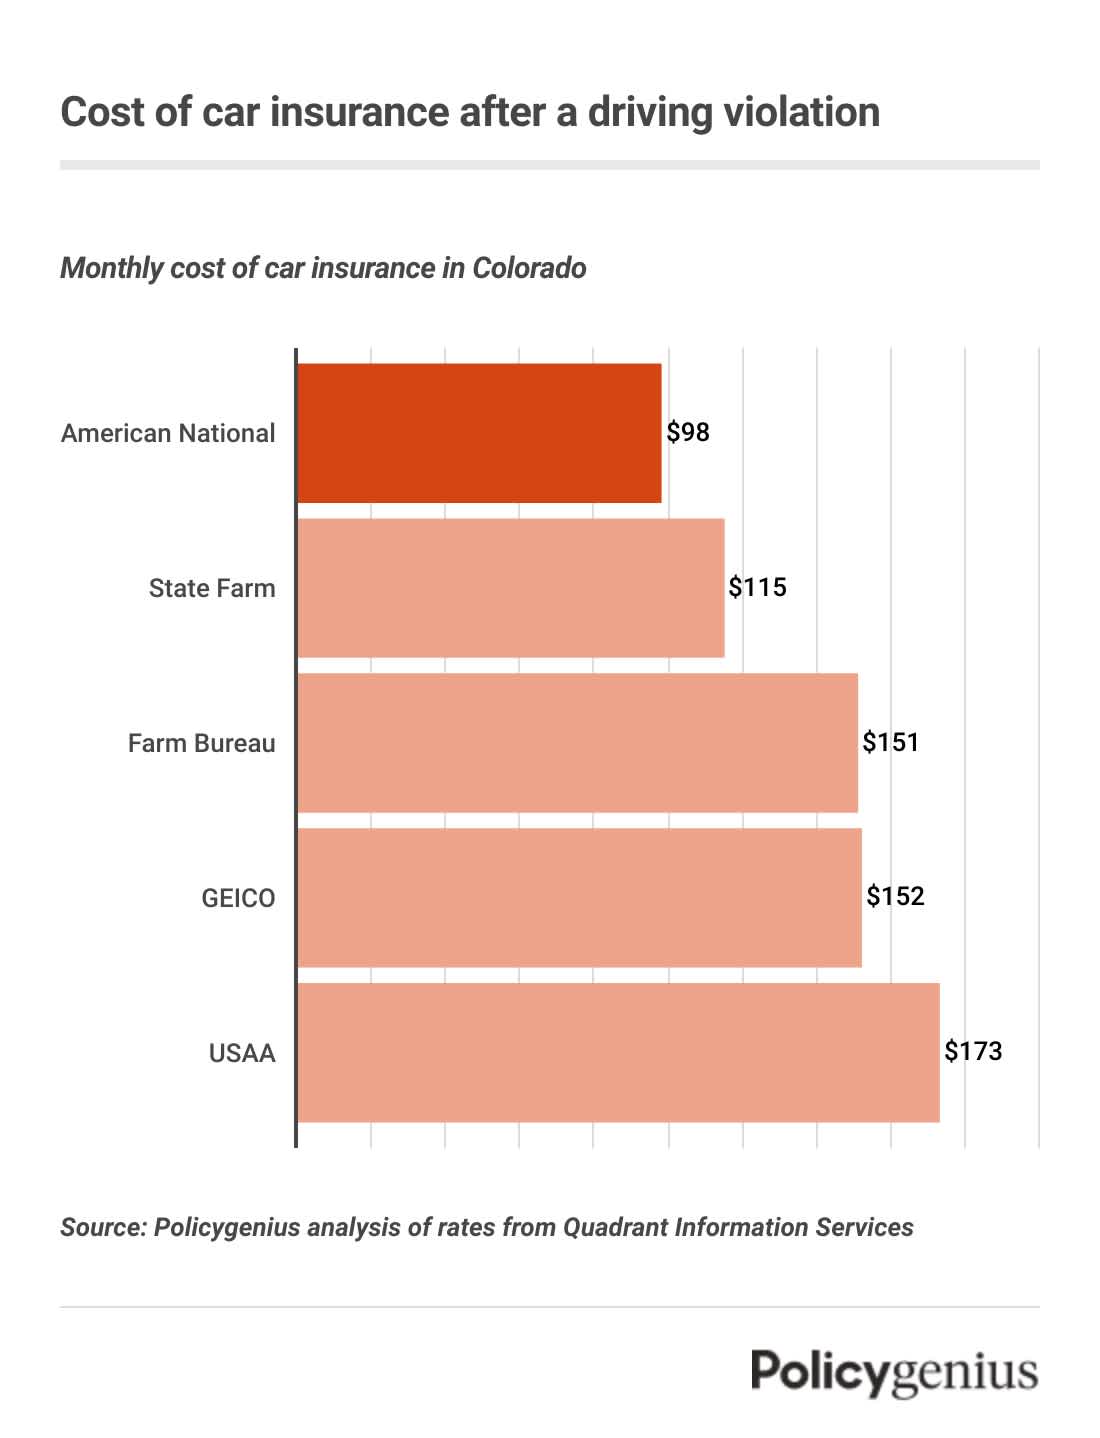 A bar graph showing the cheapest car insurance companies if you have a driving violation in Colorado.